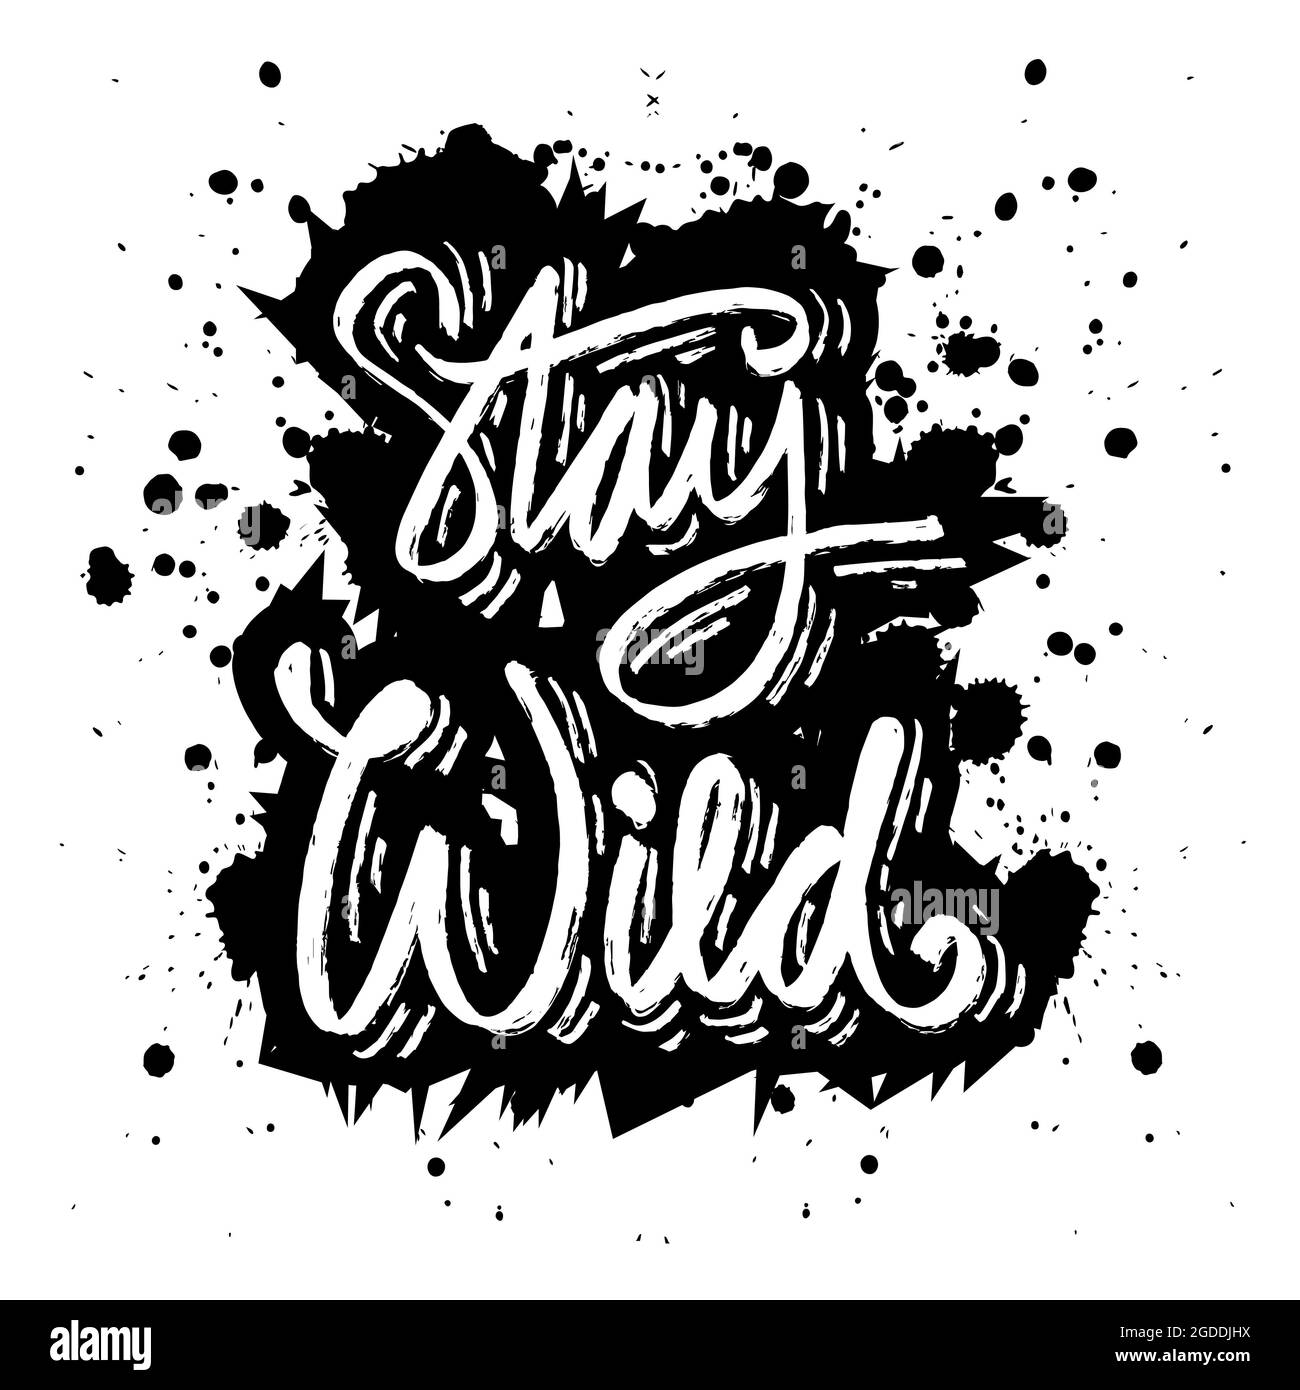 Stay Wild hand lettering. Motivational quote typography Stock Photo